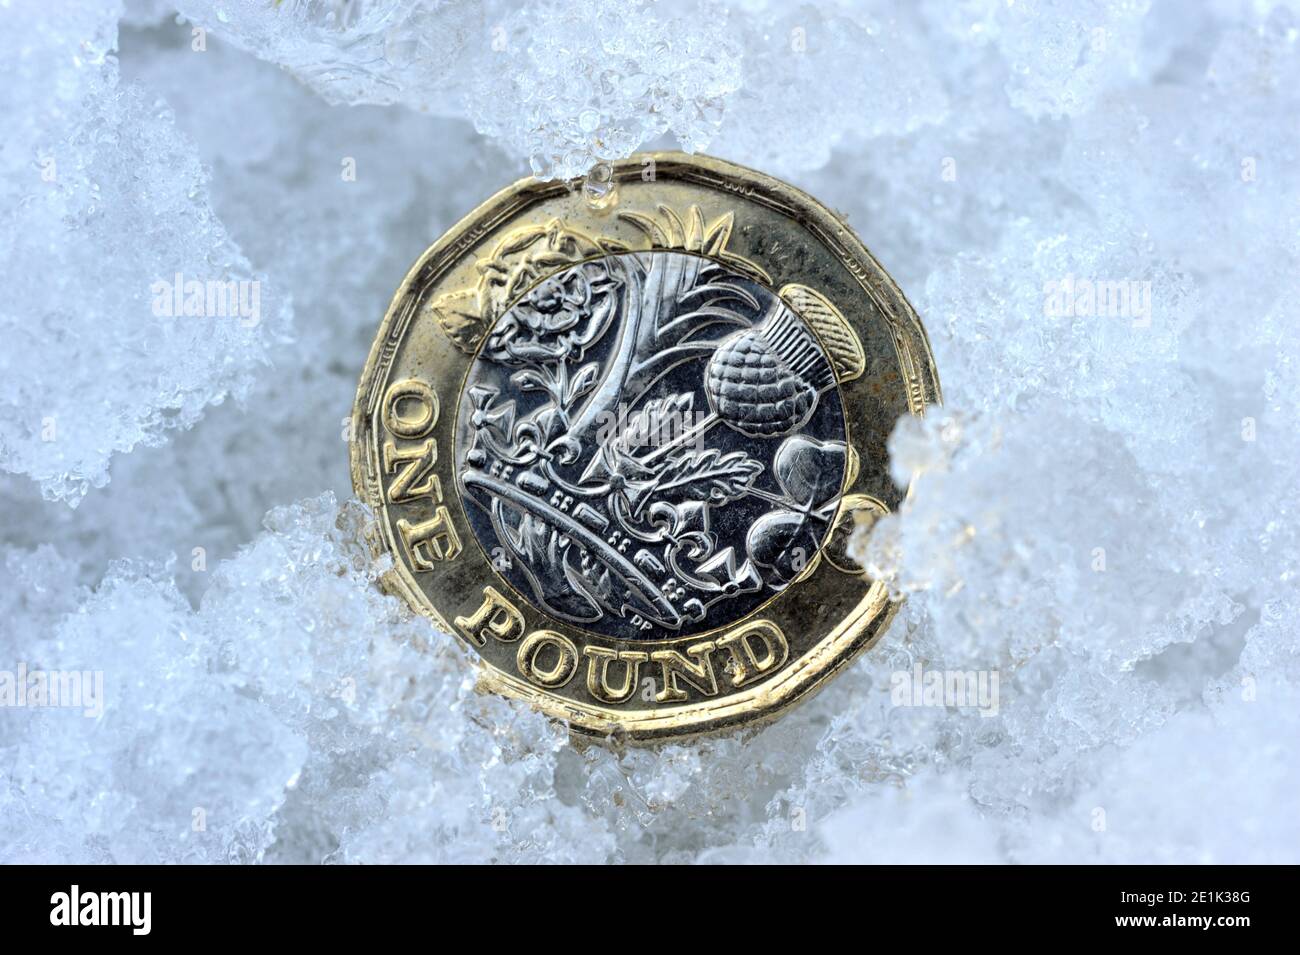 BRITISH ONE POUND COIN IN SNOW AND ICE RE THE ECONOMY WAGES INCOMES PENSIONS WINTER ETC UK Stock Photo